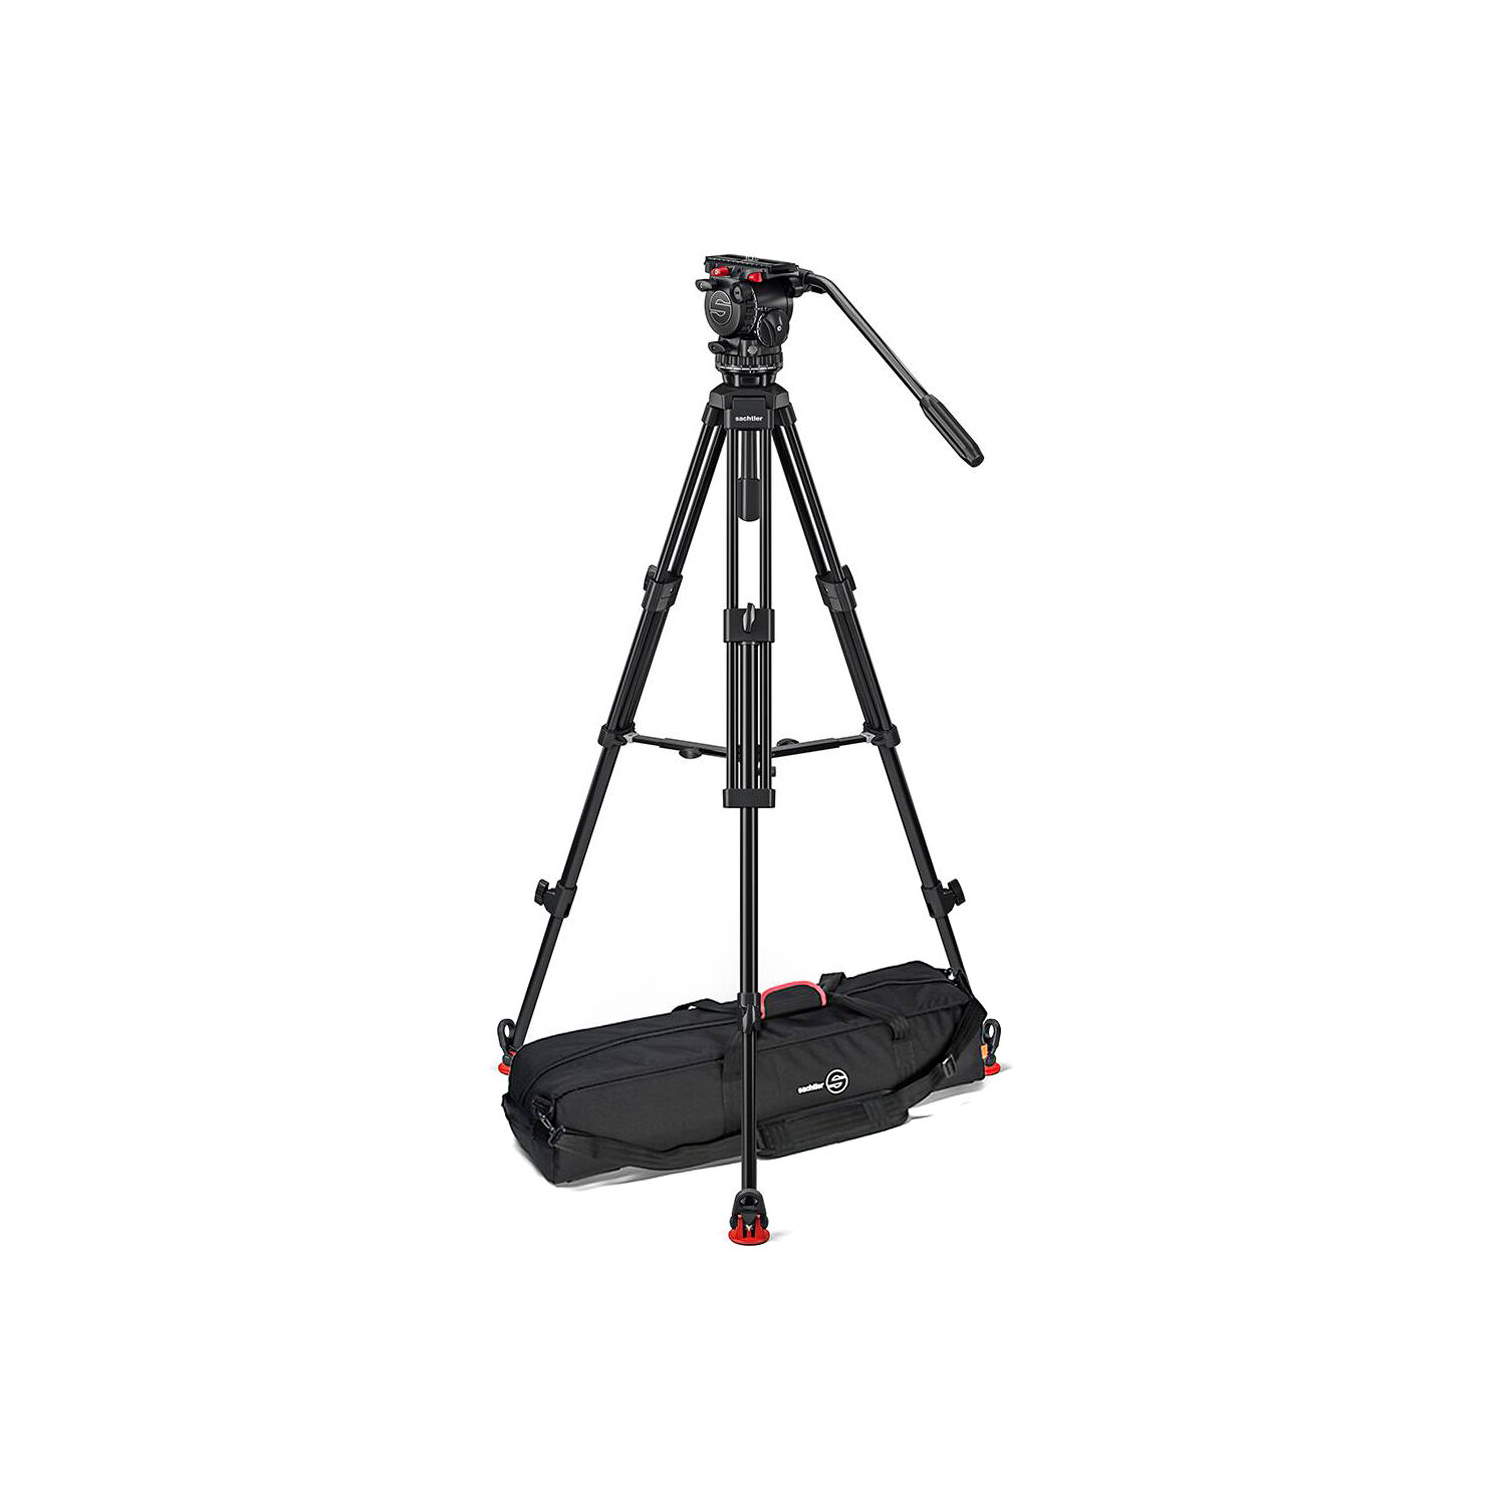 Sachtler System FSB 8 Sideload and 75/2 Aluminum Tripod Legs with Mid-Level Spreader and Bag